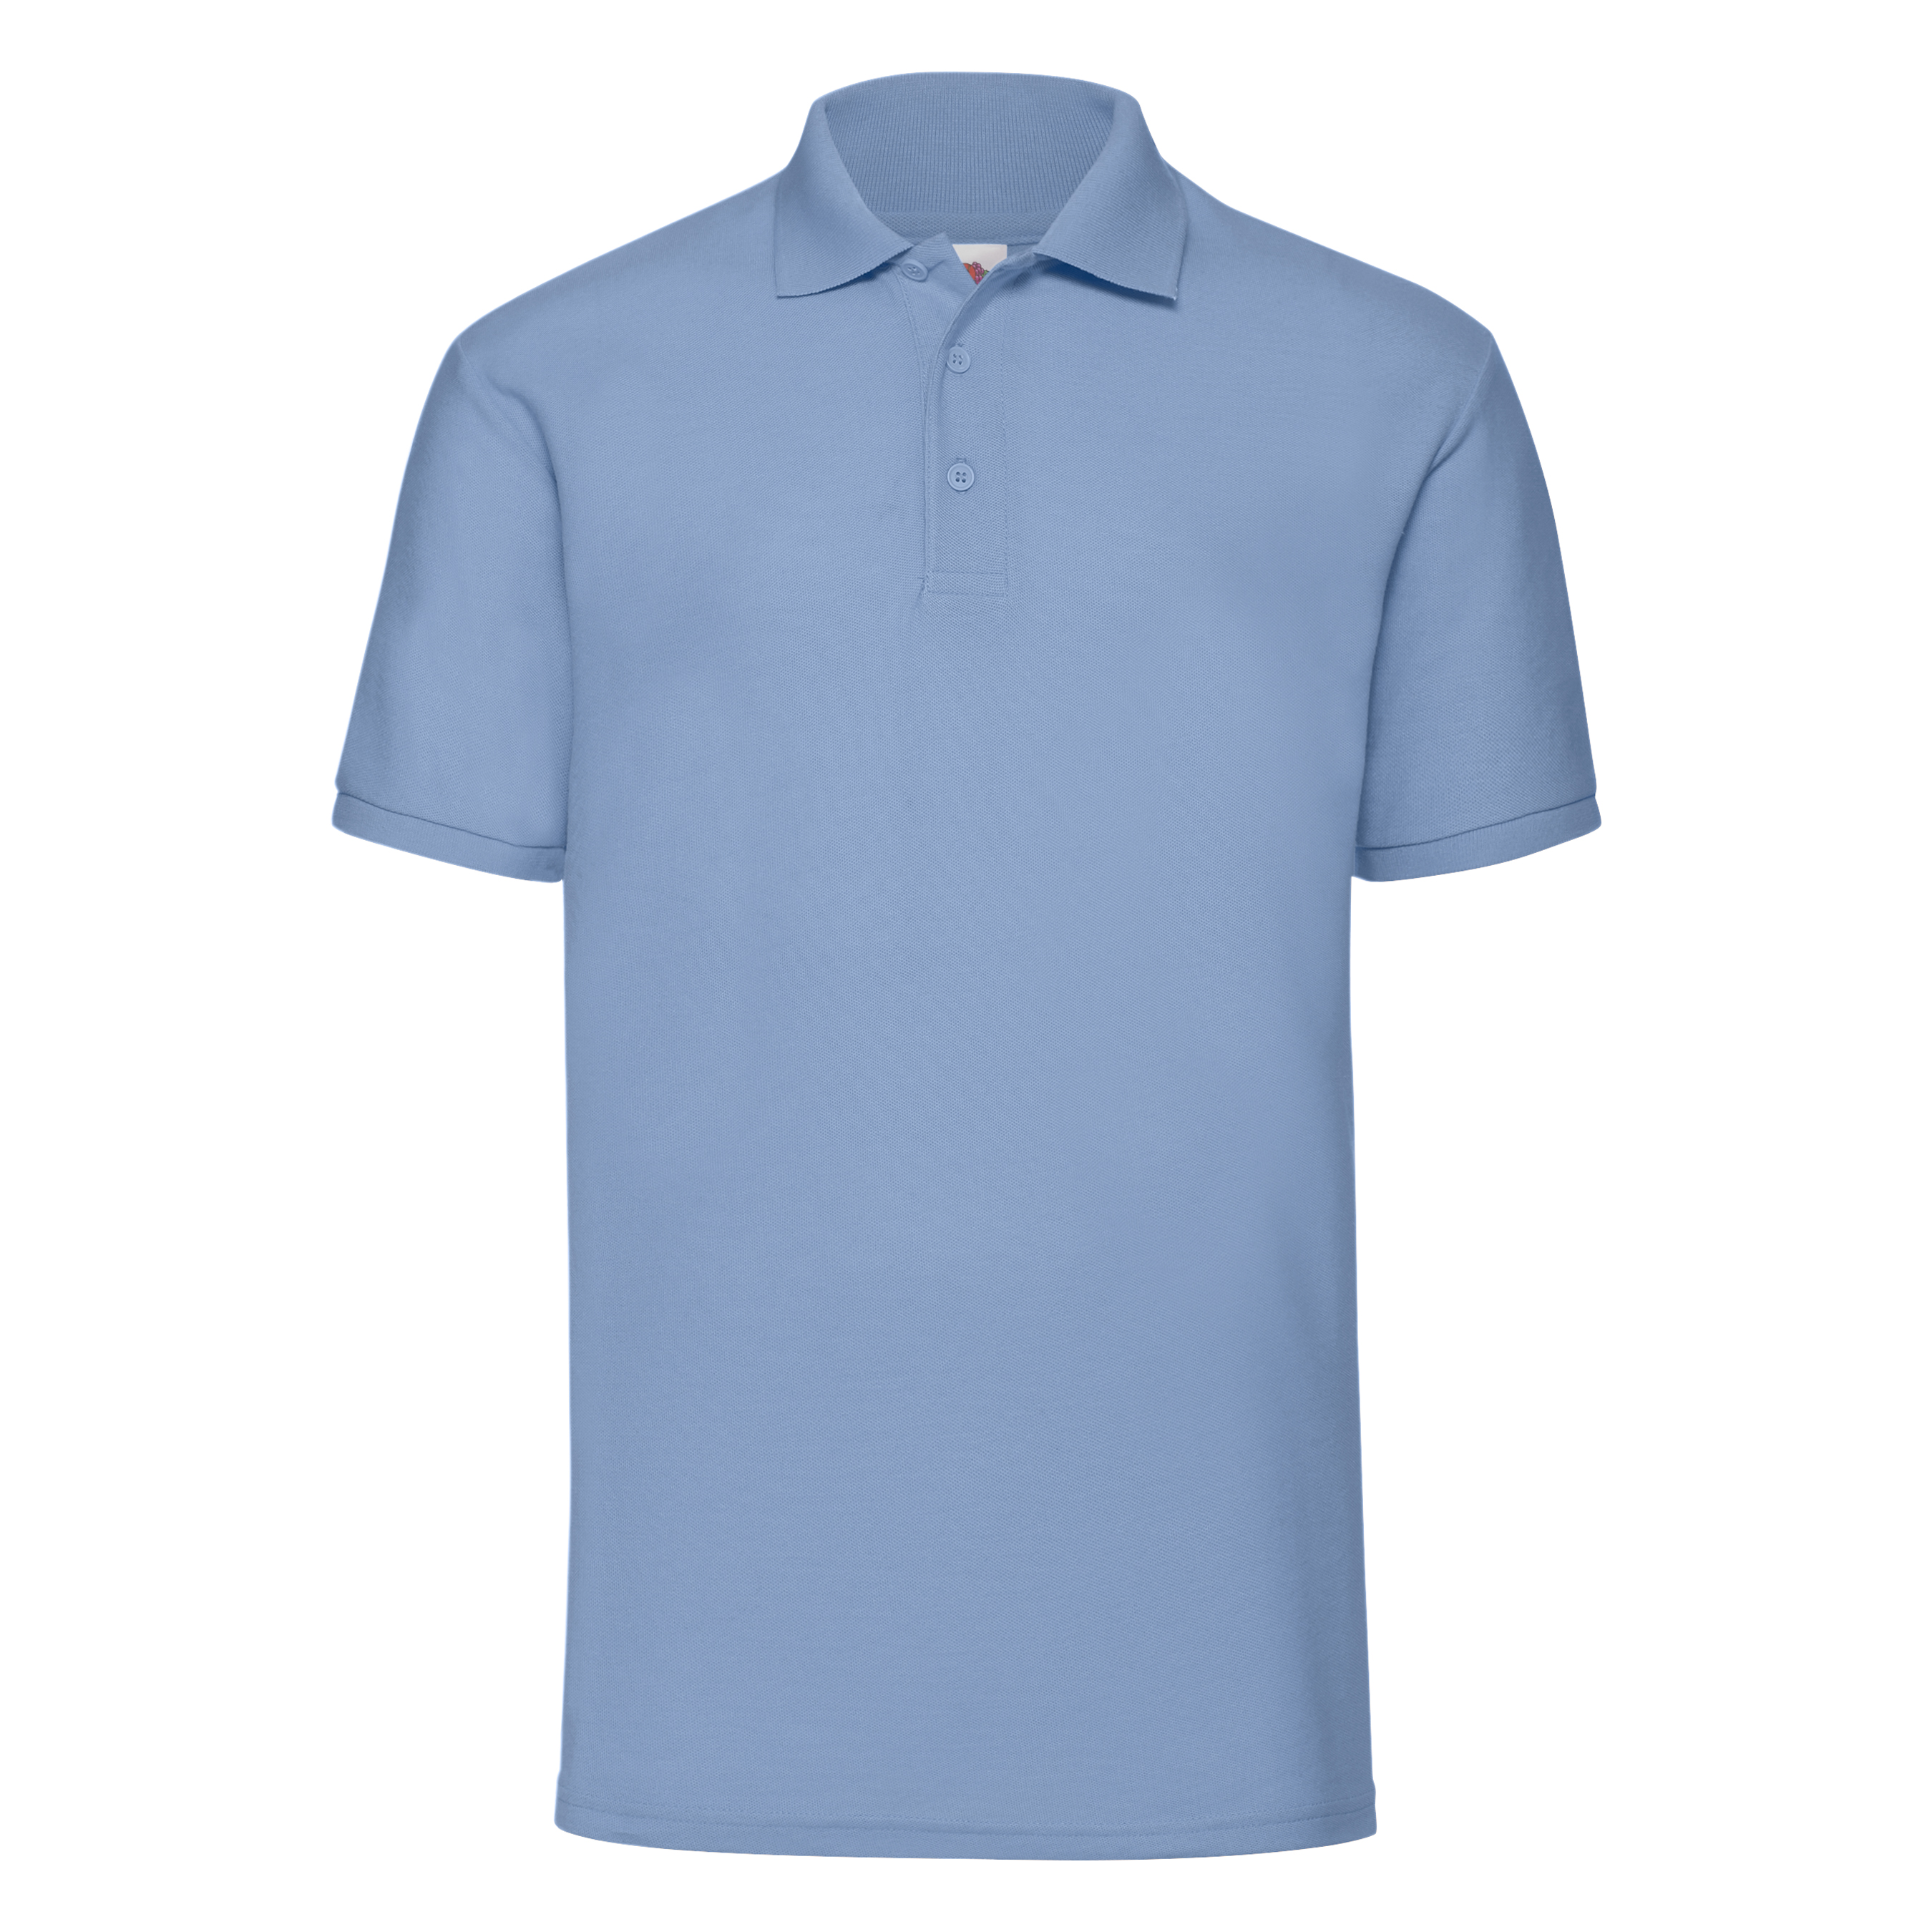 ax-httpswebsystems.s3.amazonaws.comtmp_for_downloadfruit-of-the-loom-65-35-polo-sky-blue.jpg